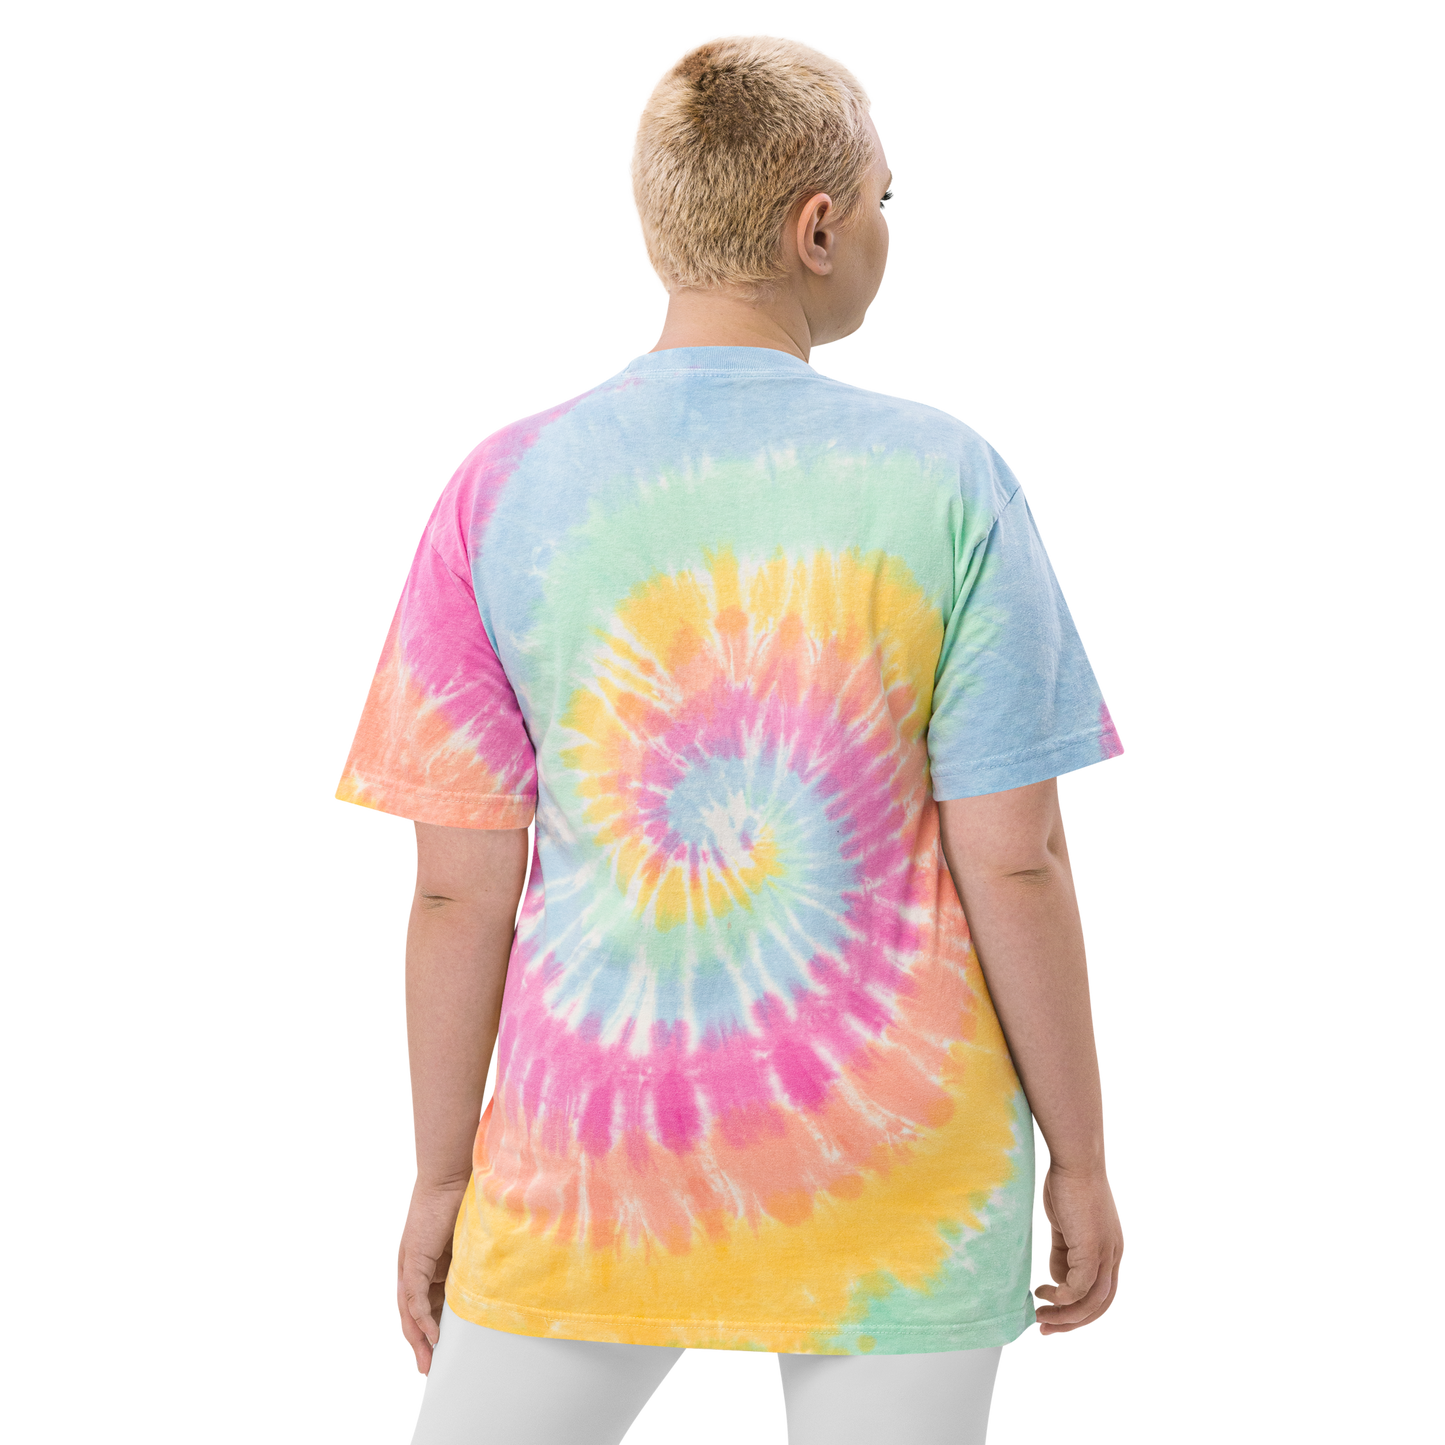 YHM Designs - YXY Whitehorse Oversized Tie-Dye T-Shirt - Crossed-X Design with Airport Code and Vintage Propliner - White Embroidery - Image 12